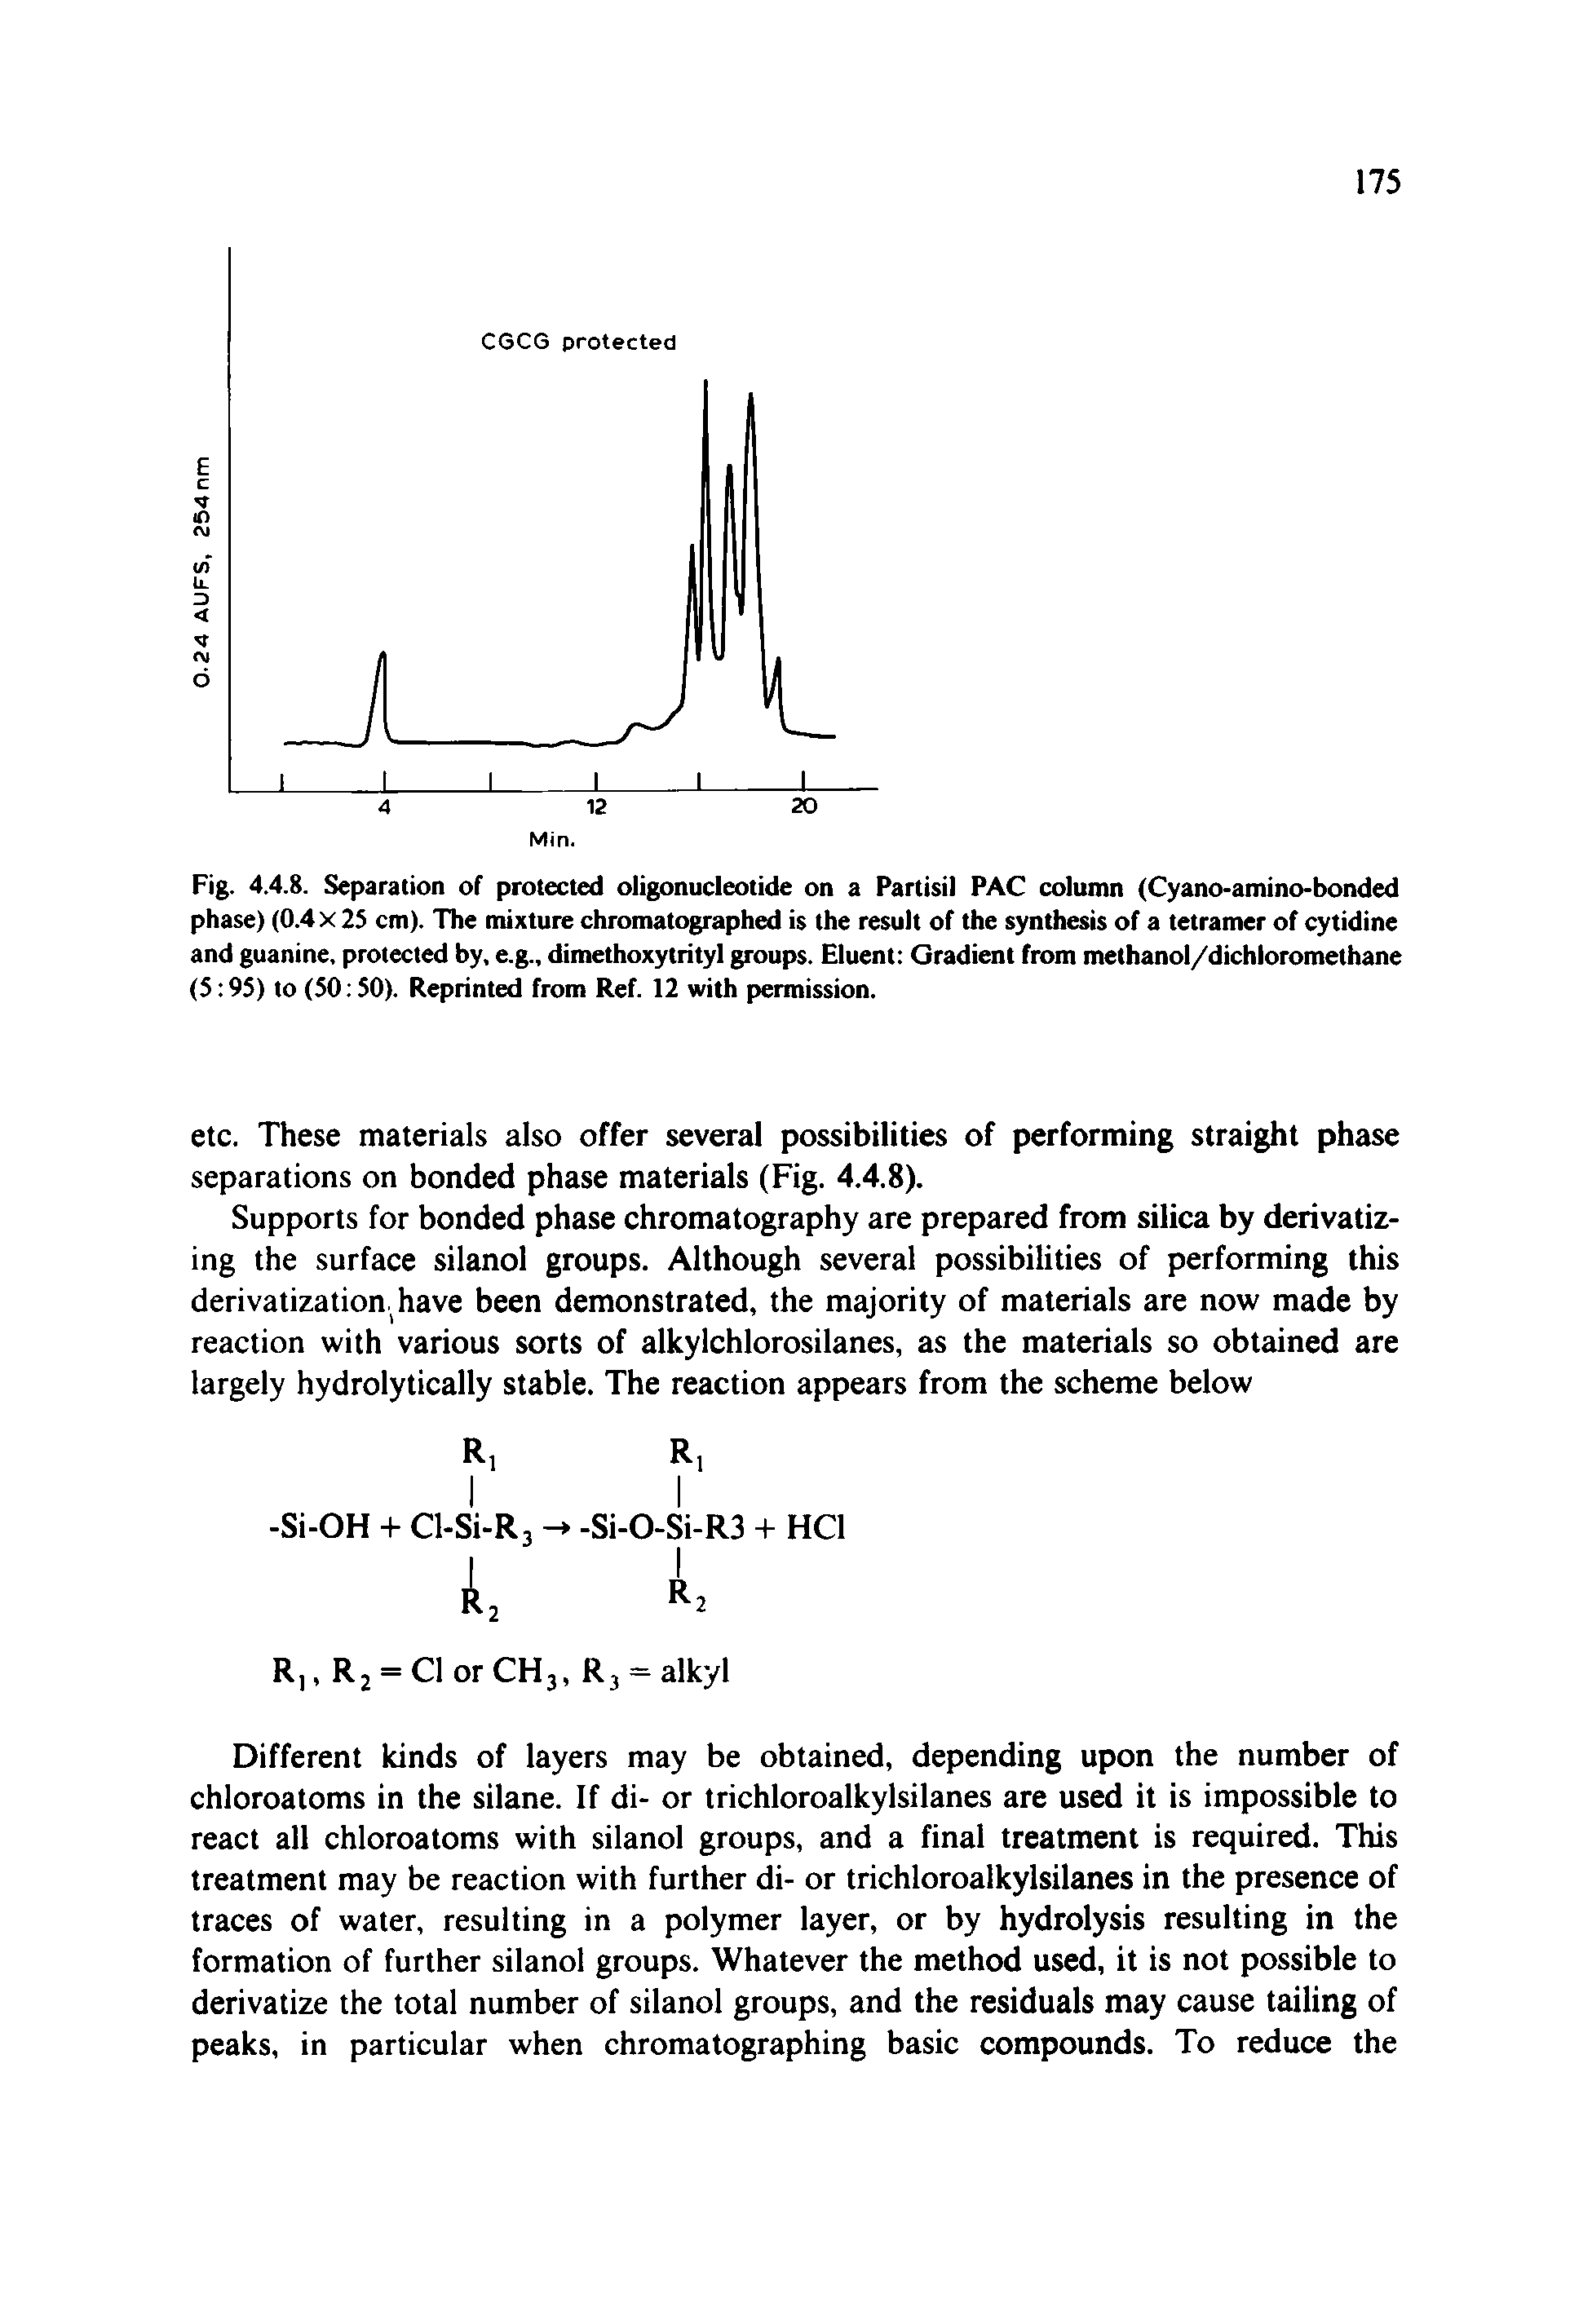 Fig. 4.4.8. Separation of protected oligonucleotide on a Partisil PAC column (Cyano-amino-bonded phase) (0.4x25 cm). The mixture chromatographed is the result of the synthesis of a tetramer of cytidine and guanine, protected by, e.g., dimethoxytrityl groups. Eluent Gradient from methanol/dichloromethane (5 95) to (50 50). Reprinted from Ref. 12 with permission.